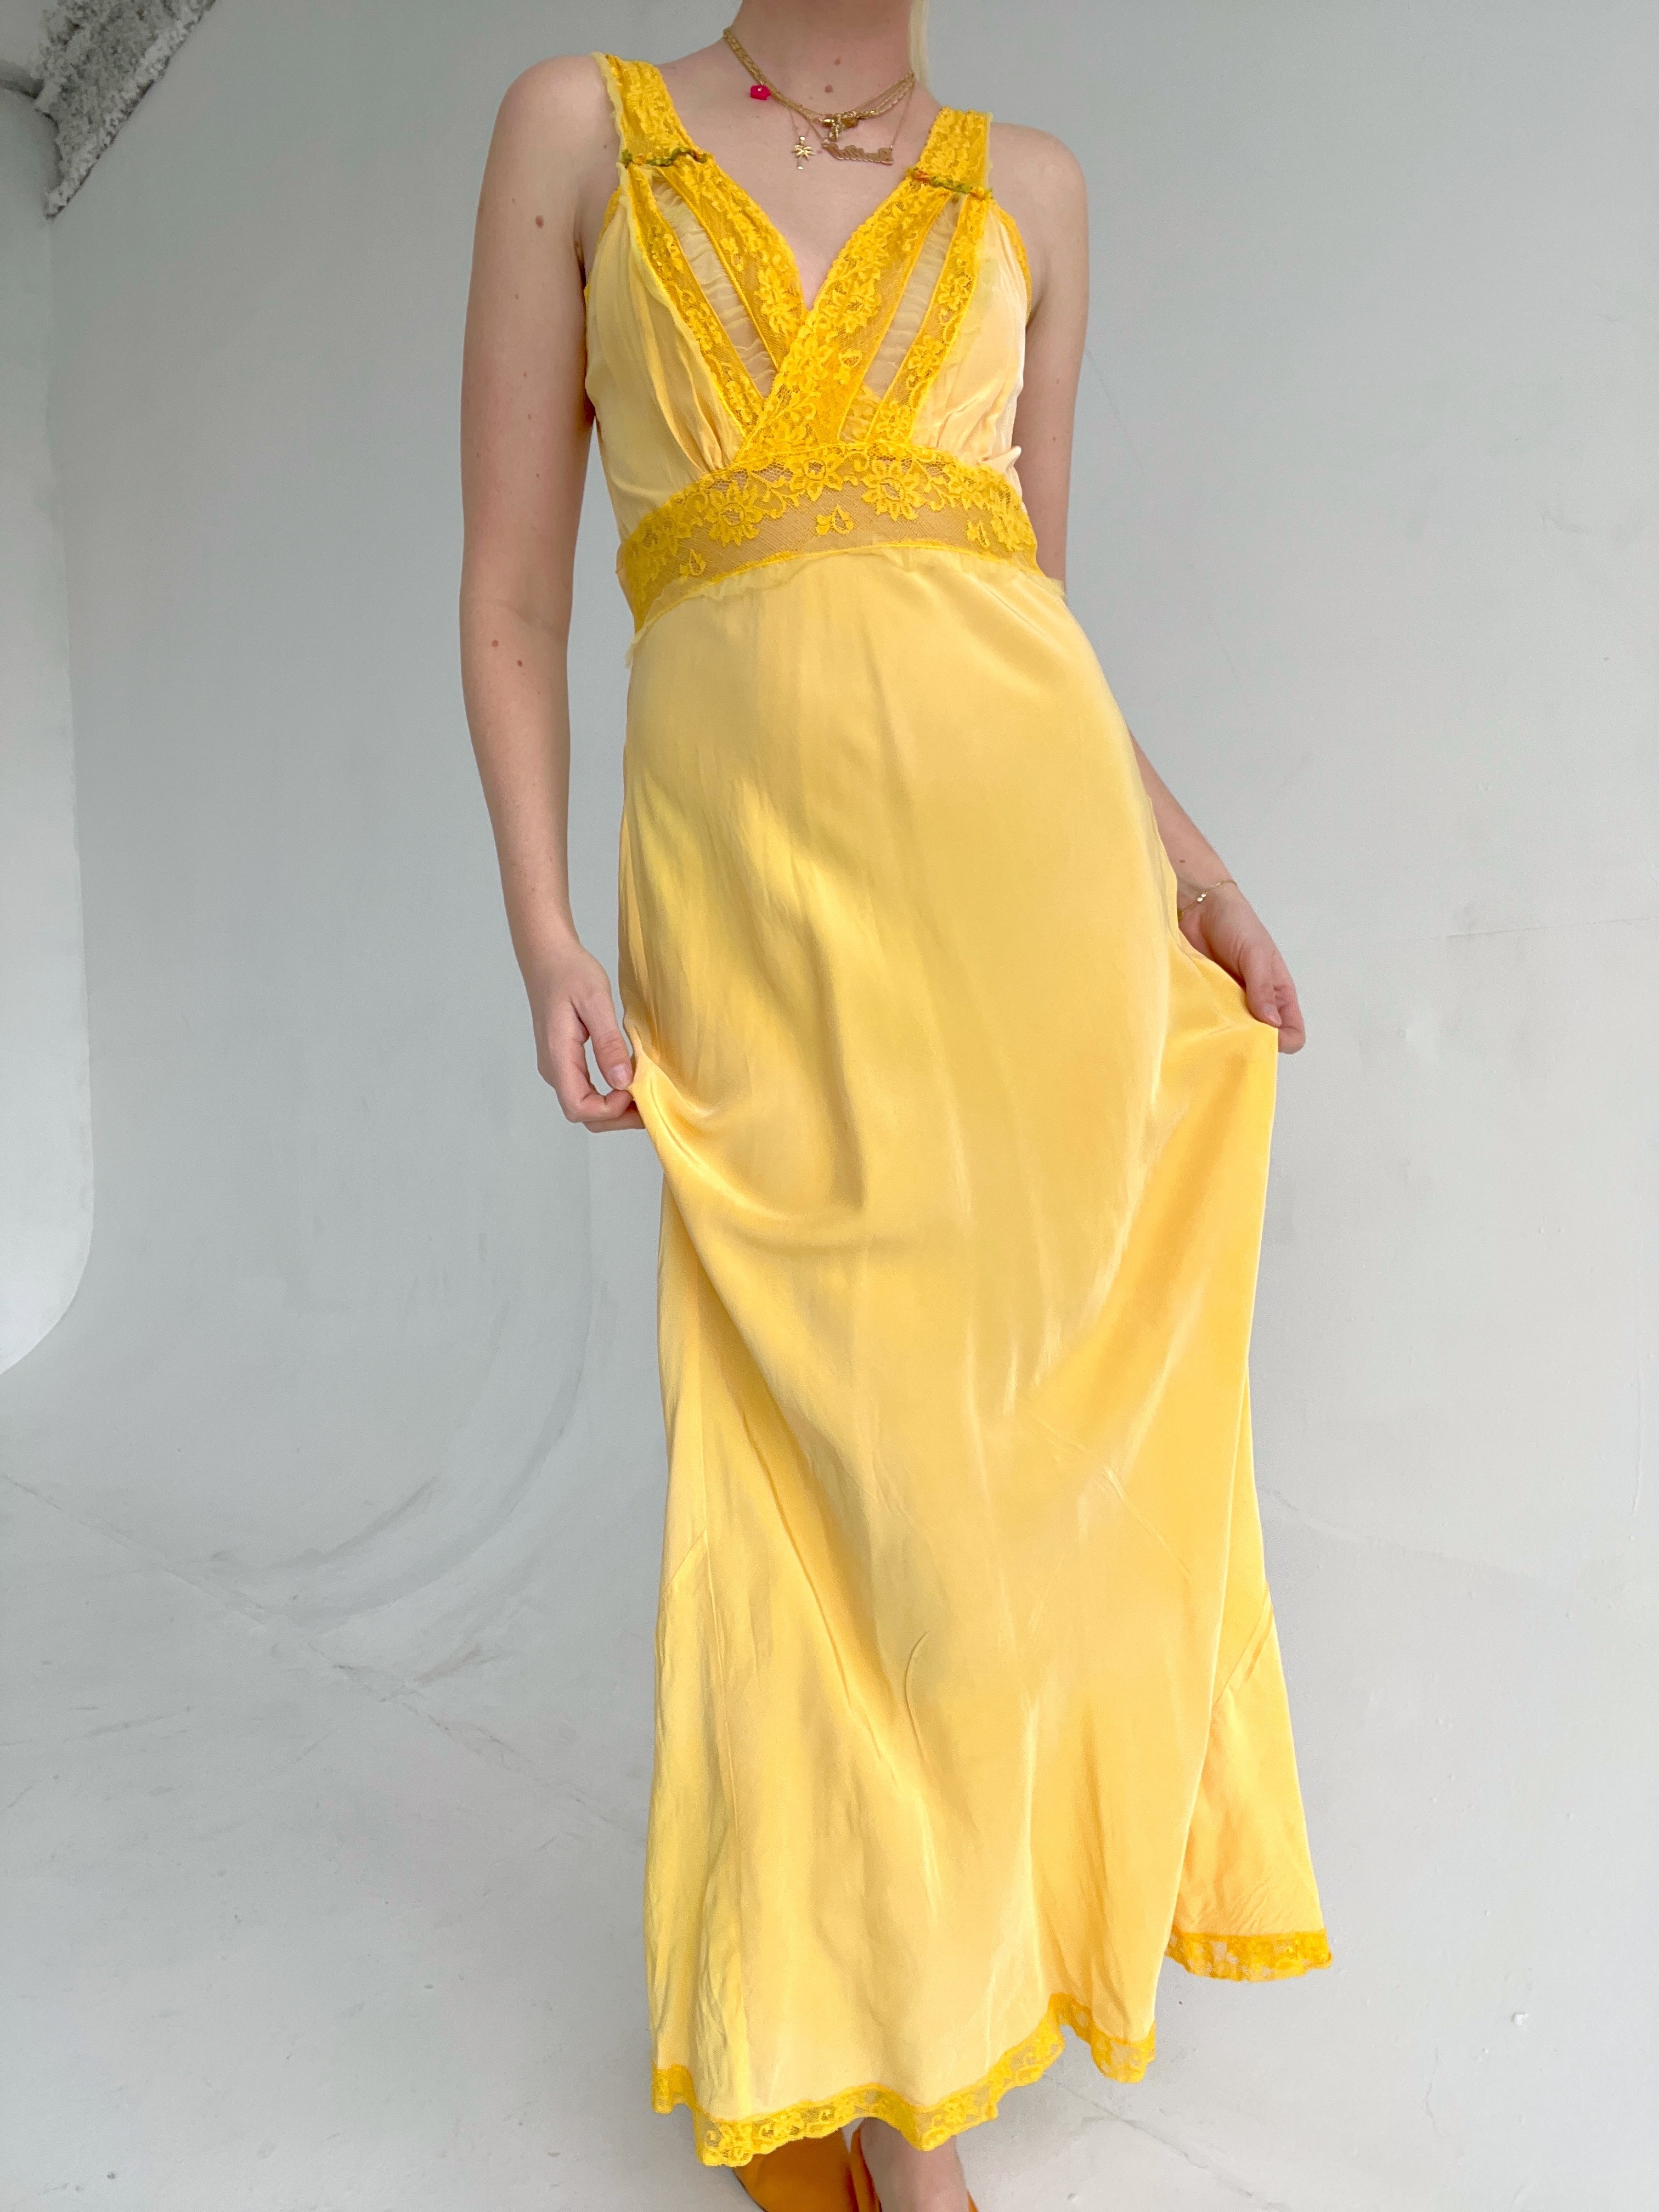 Hand Dyed Golden Yellow Slip with Tulle